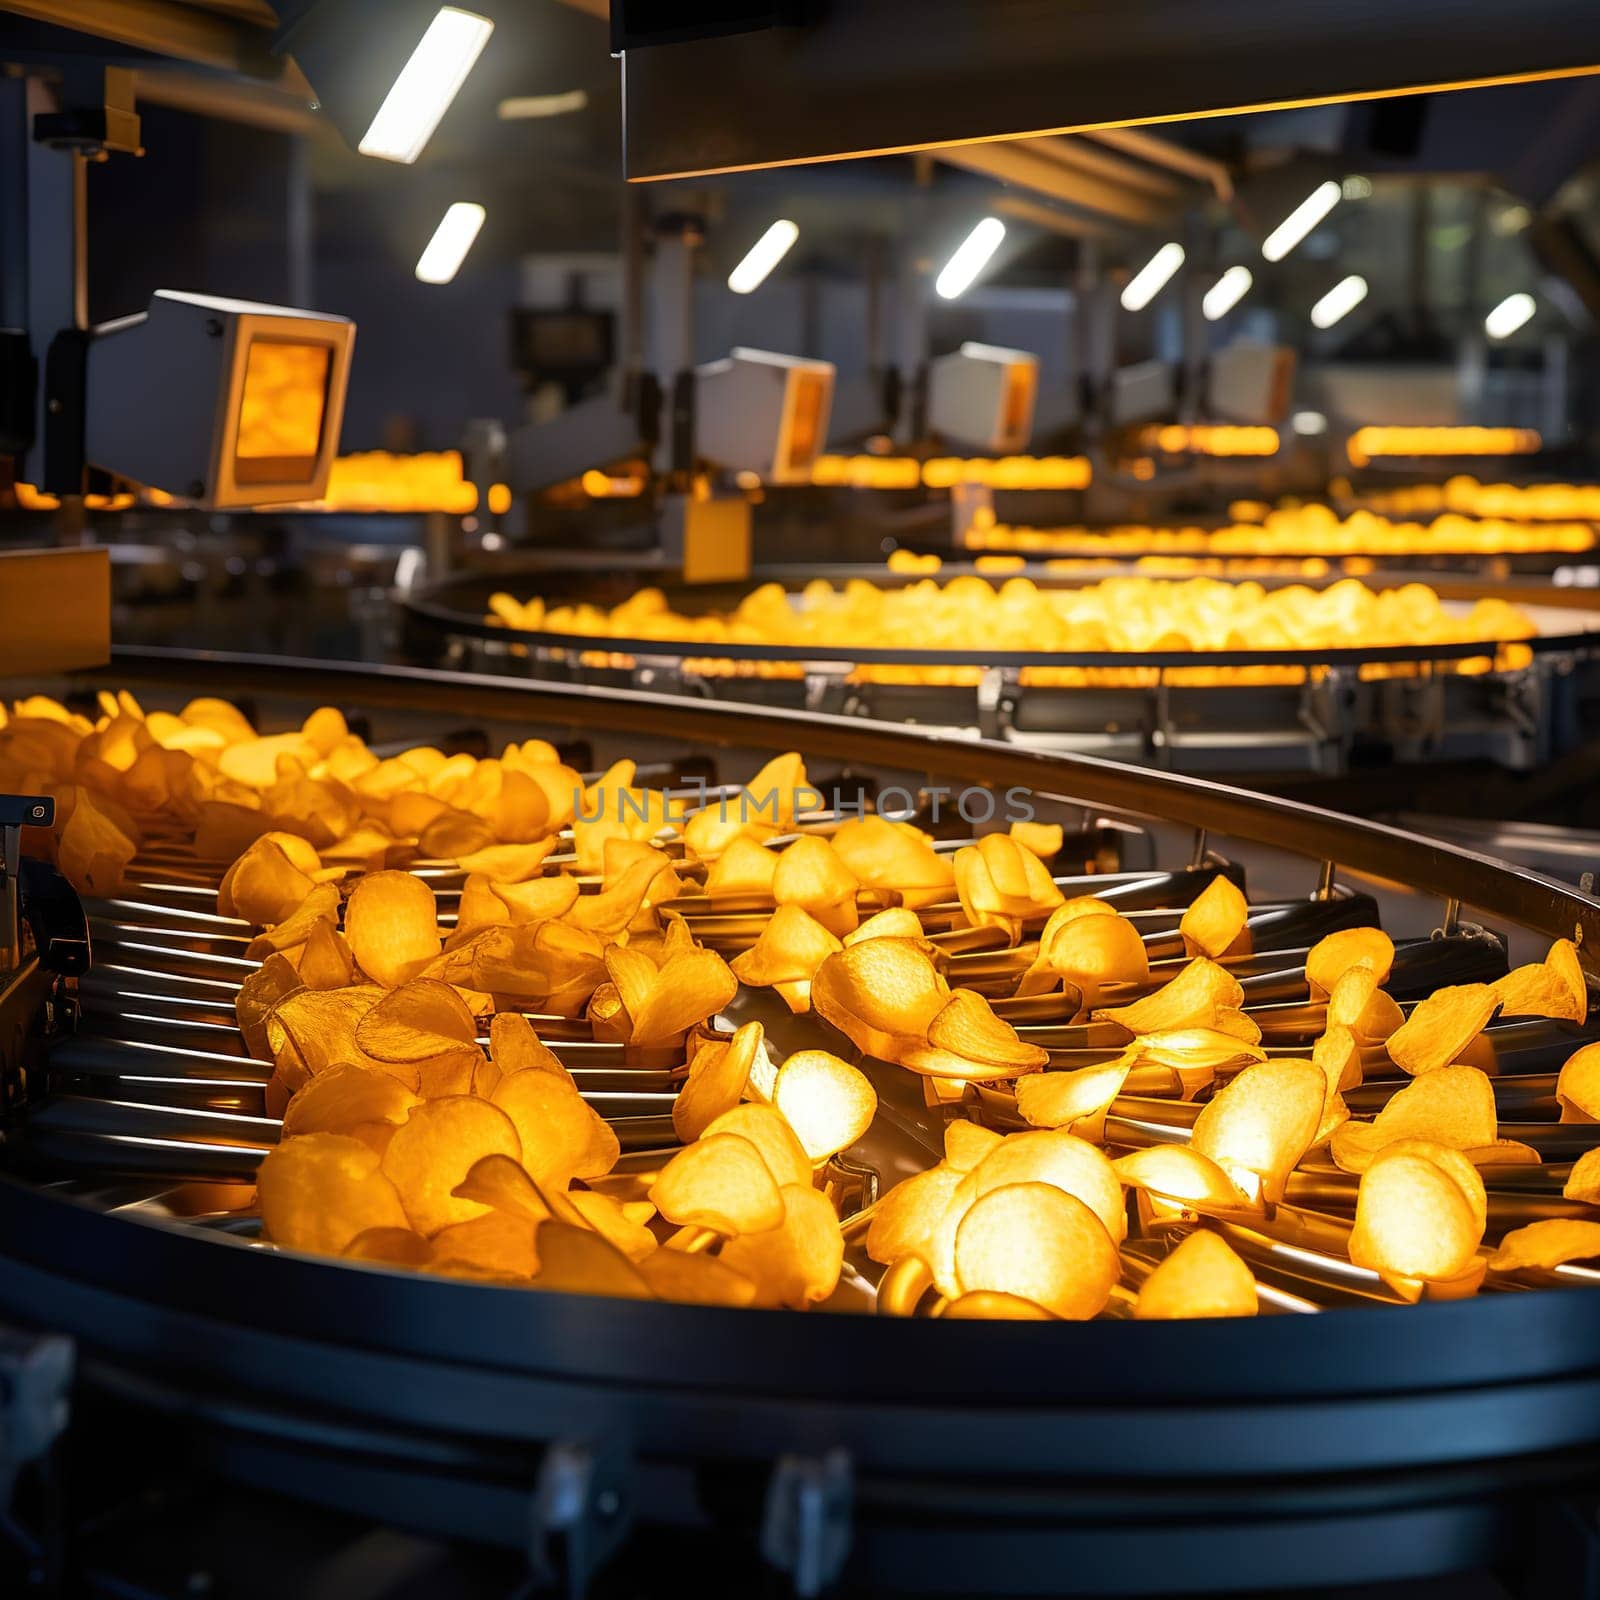 Production of potatoes chips, industrial and food concept by Kadula